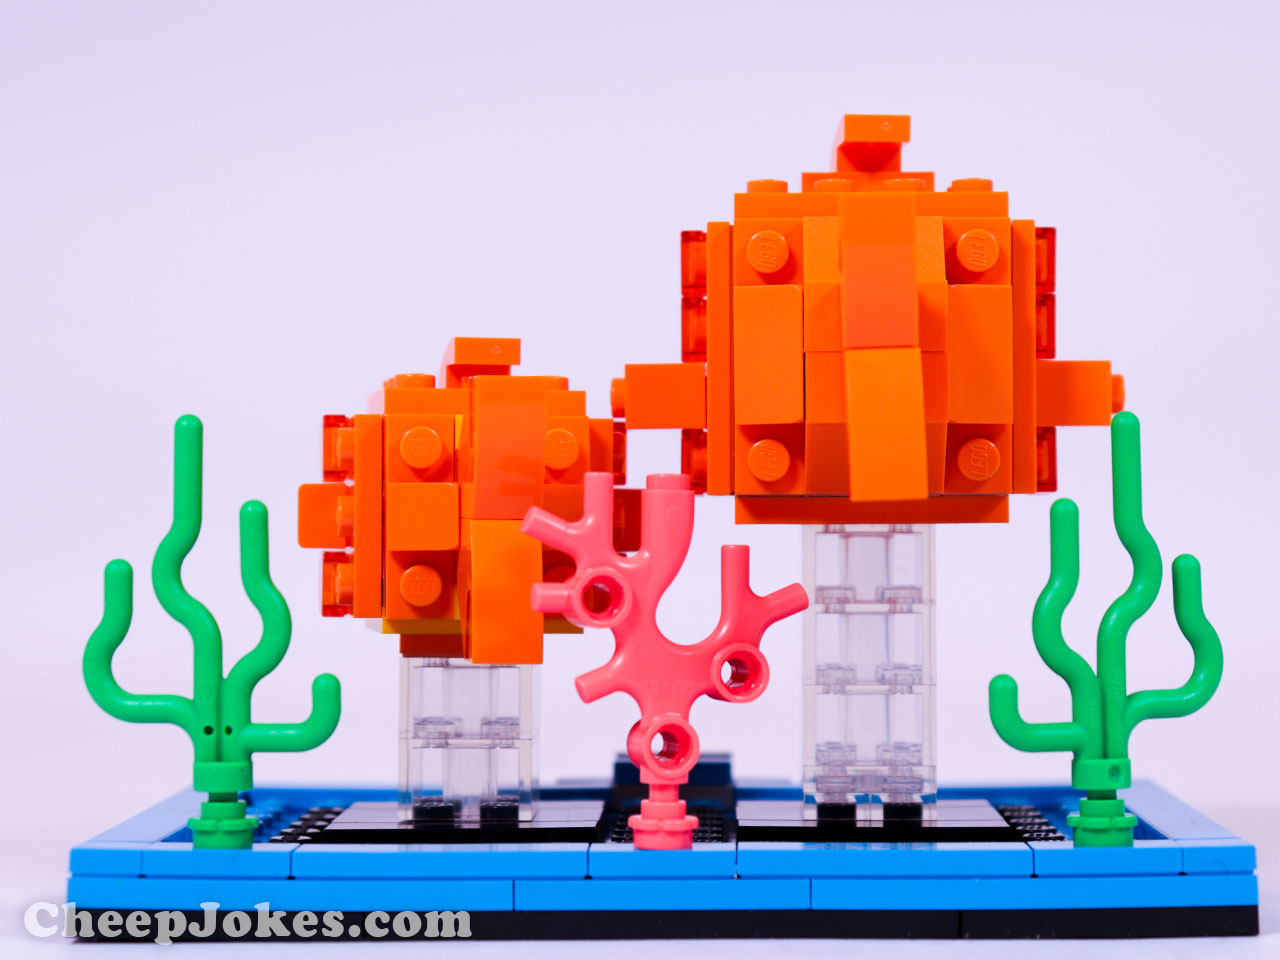 Kids who love animals will adore this BrickHeadz™ Goldfish (40442) build-and-display set. The goldfish and fry both sit on iconic BrickHeadz stands and look as if they’re ready to blow bubbles underwater. The stands fit into a sturdy, blue base that includes coral and plants and comes with 2 stickers – 1 with bubbles, 1 with corals – for decorating the base. This buildable pet set is a perfect gift for all kids, BrickHeadz collectors and pet lovers.